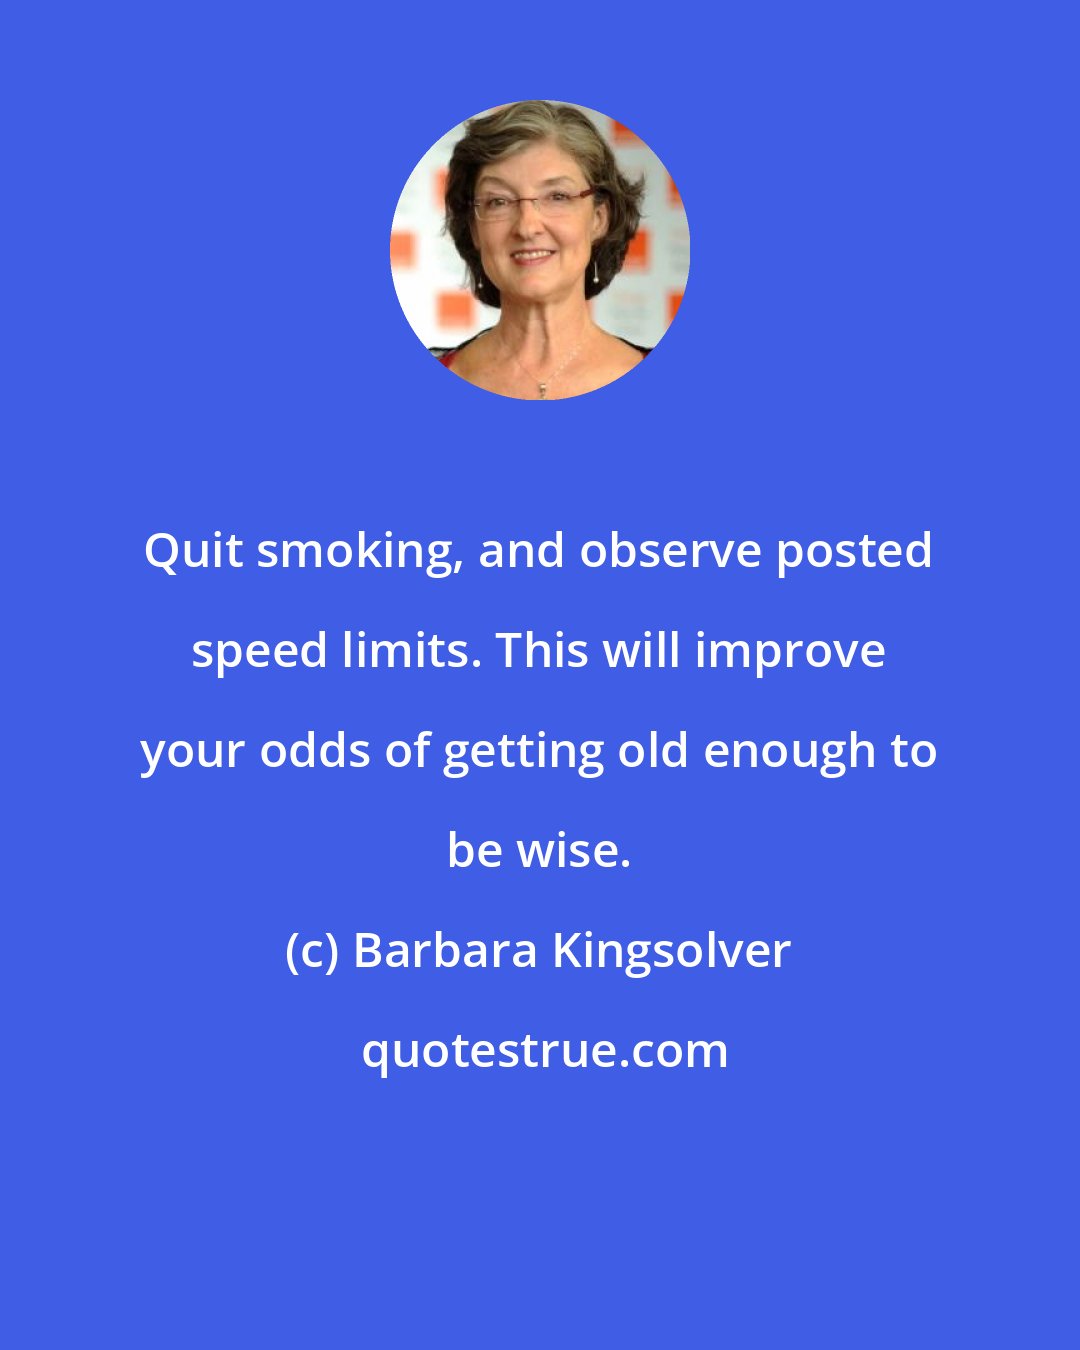 Barbara Kingsolver: Quit smoking, and observe posted speed limits. This will improve your odds of getting old enough to be wise.